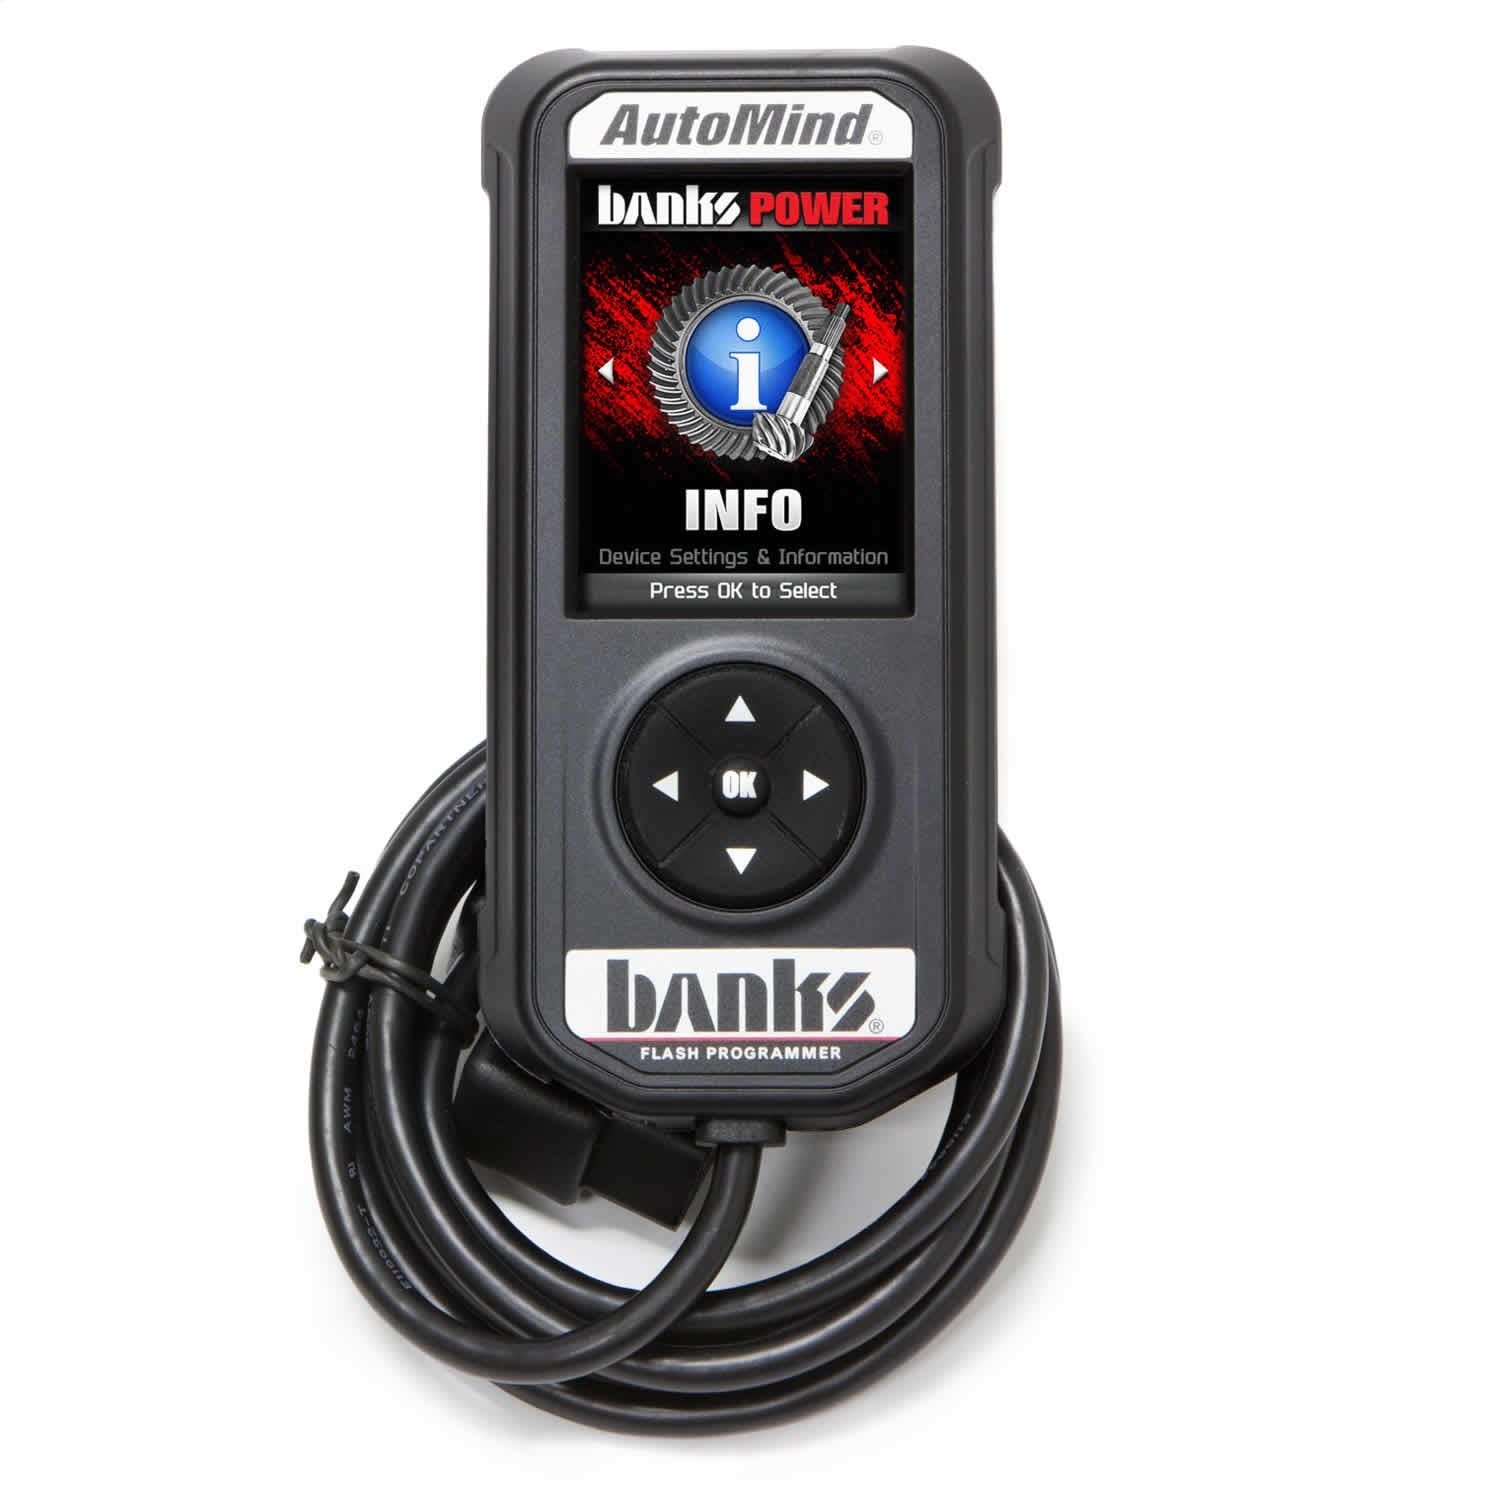 Banks Power 66412 AutoMind® 2 Programmer